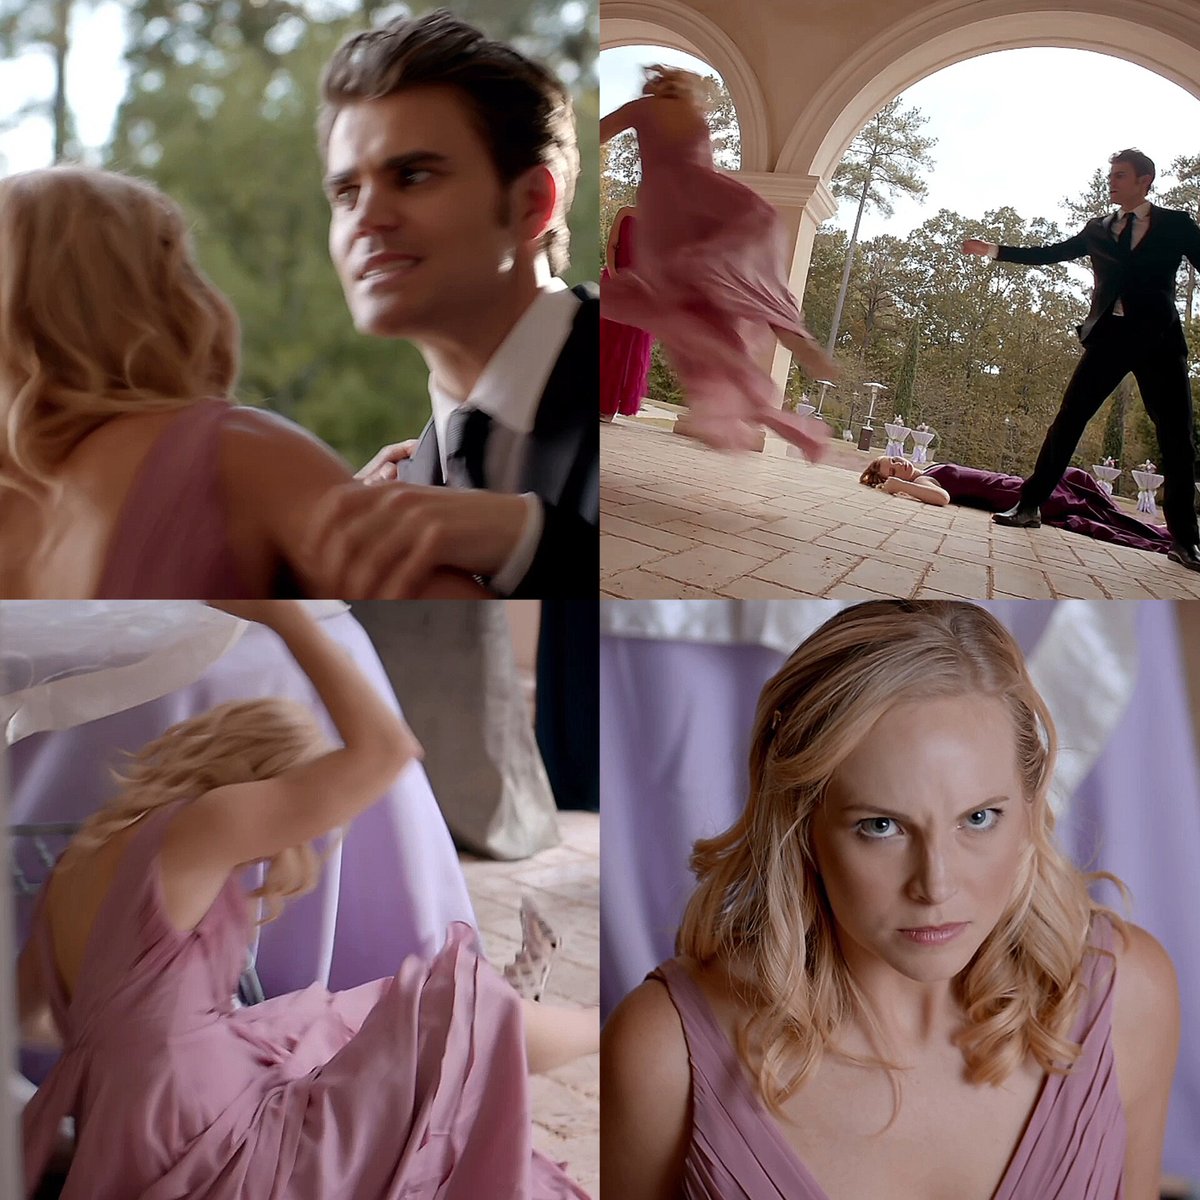 humanity off stefan with his ex girlfriend vs. with his fiancé